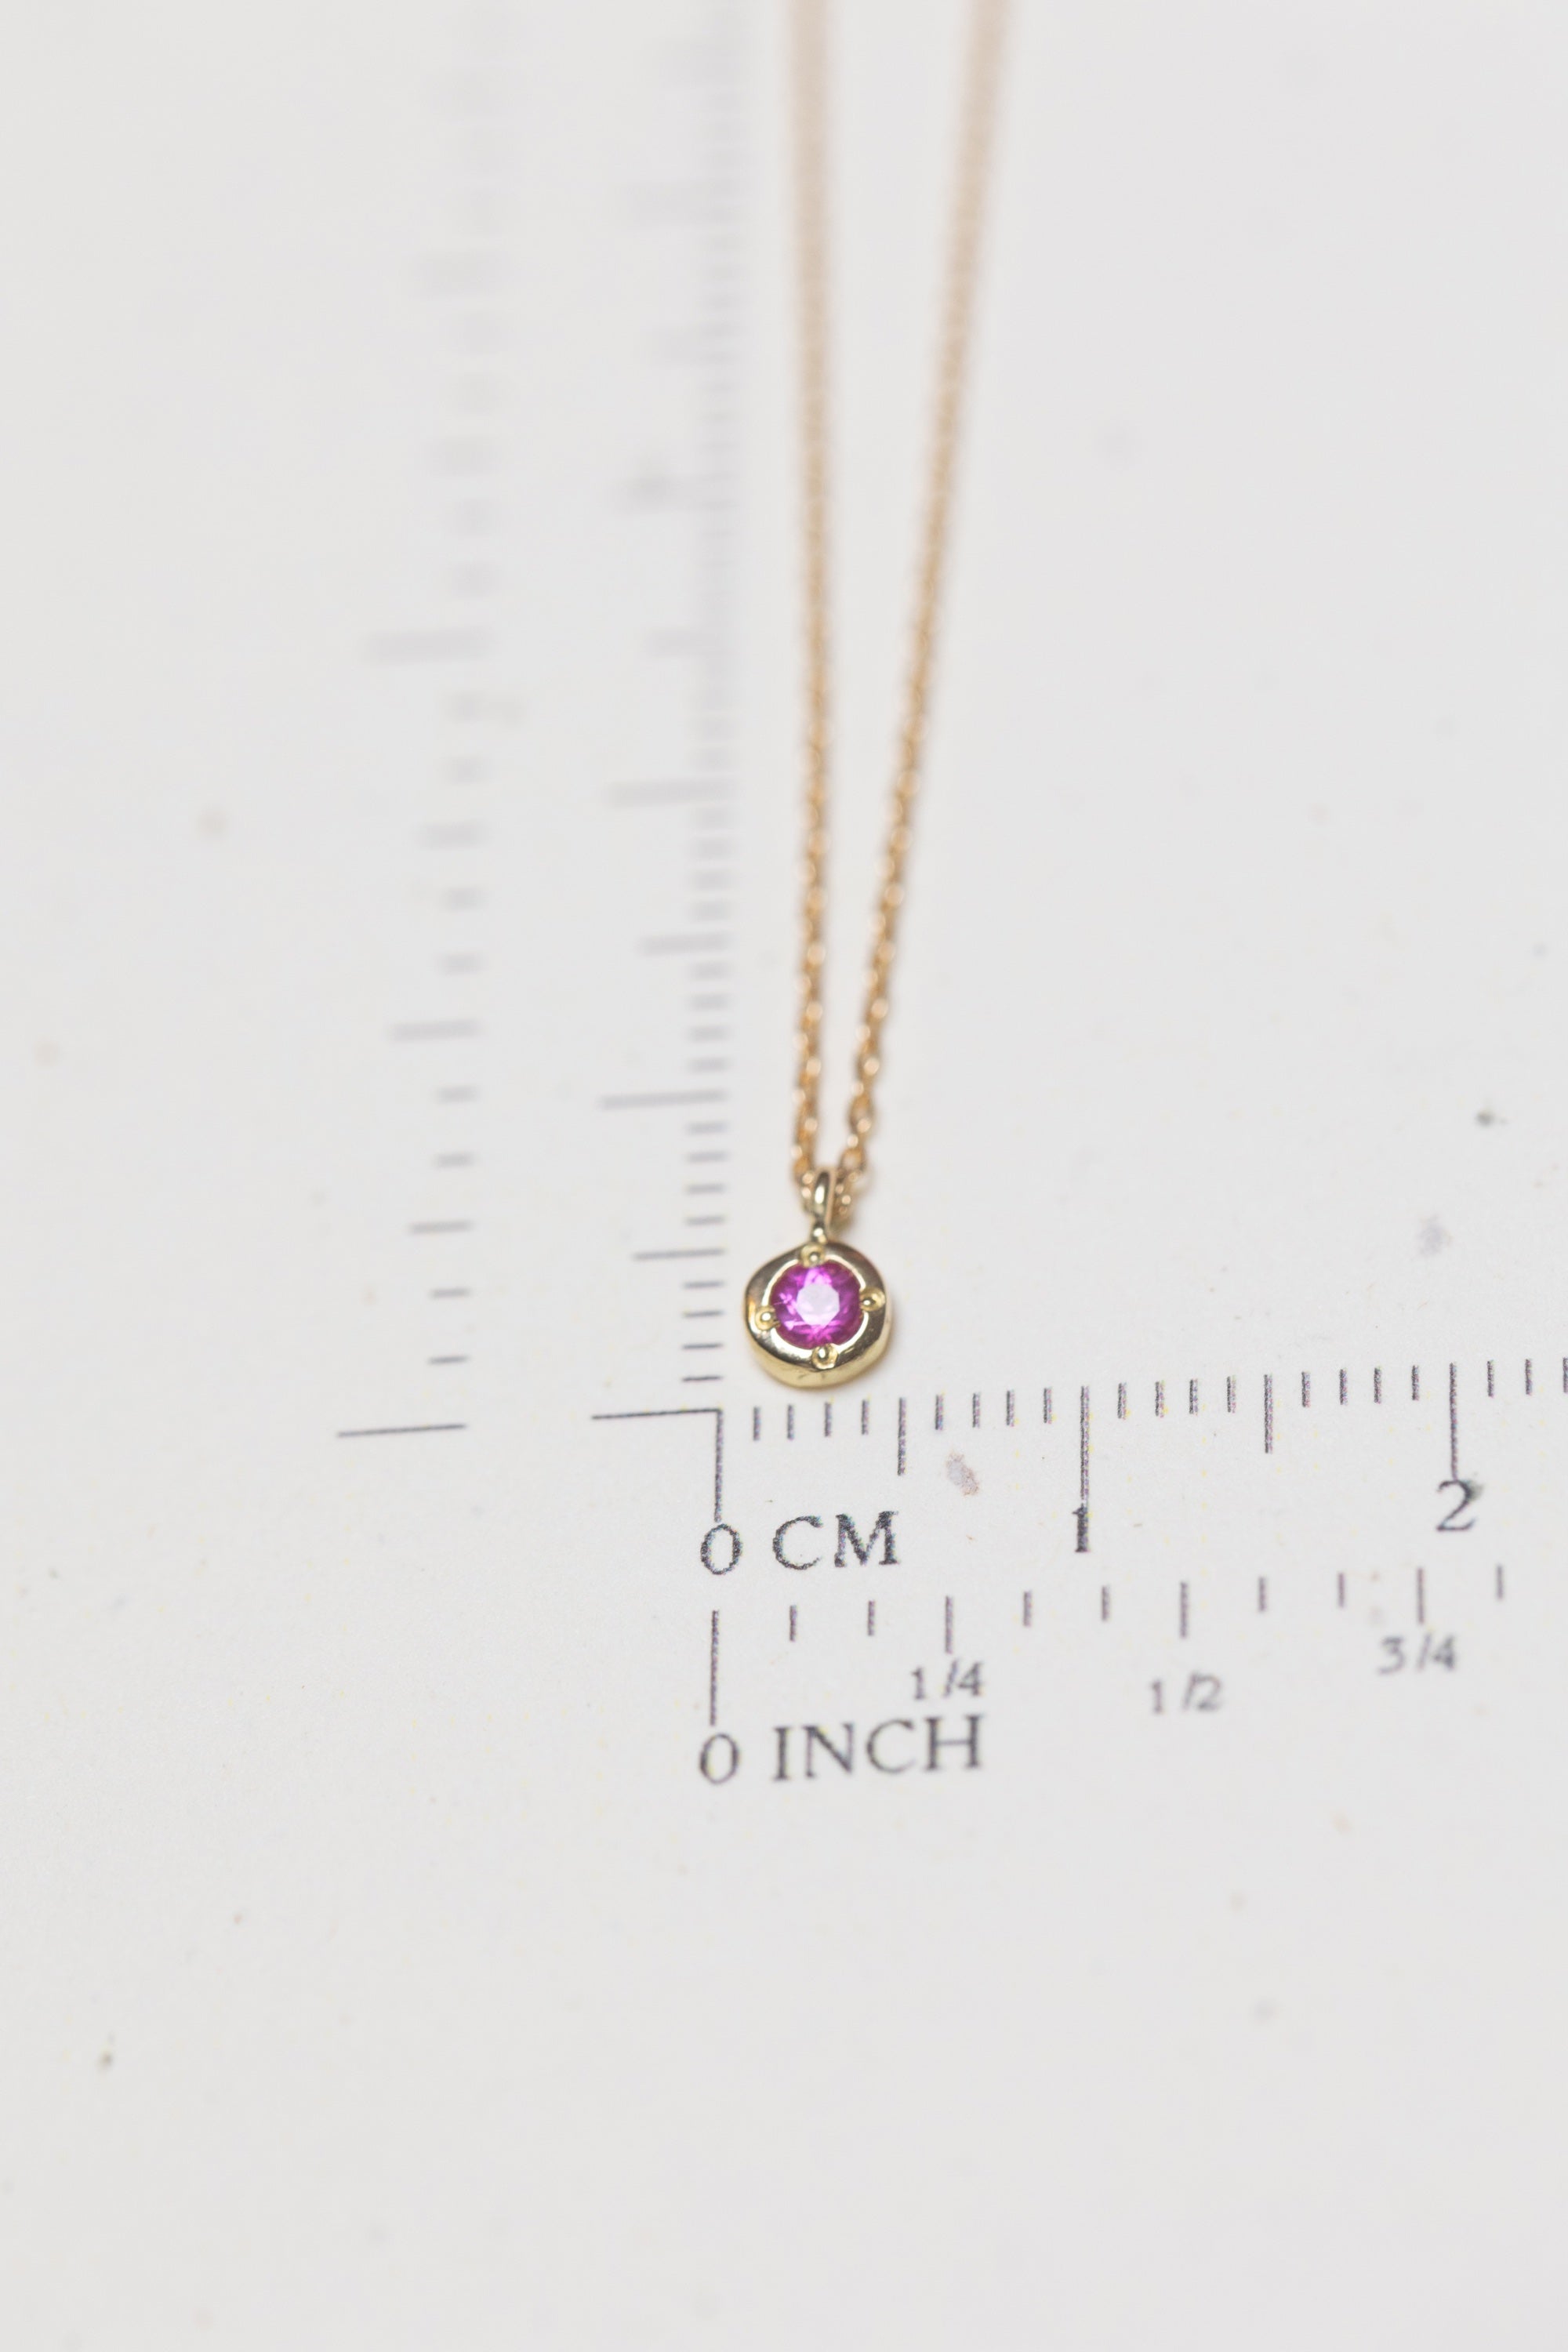 Ruby in Pink Set in Dots Necklace (18k)